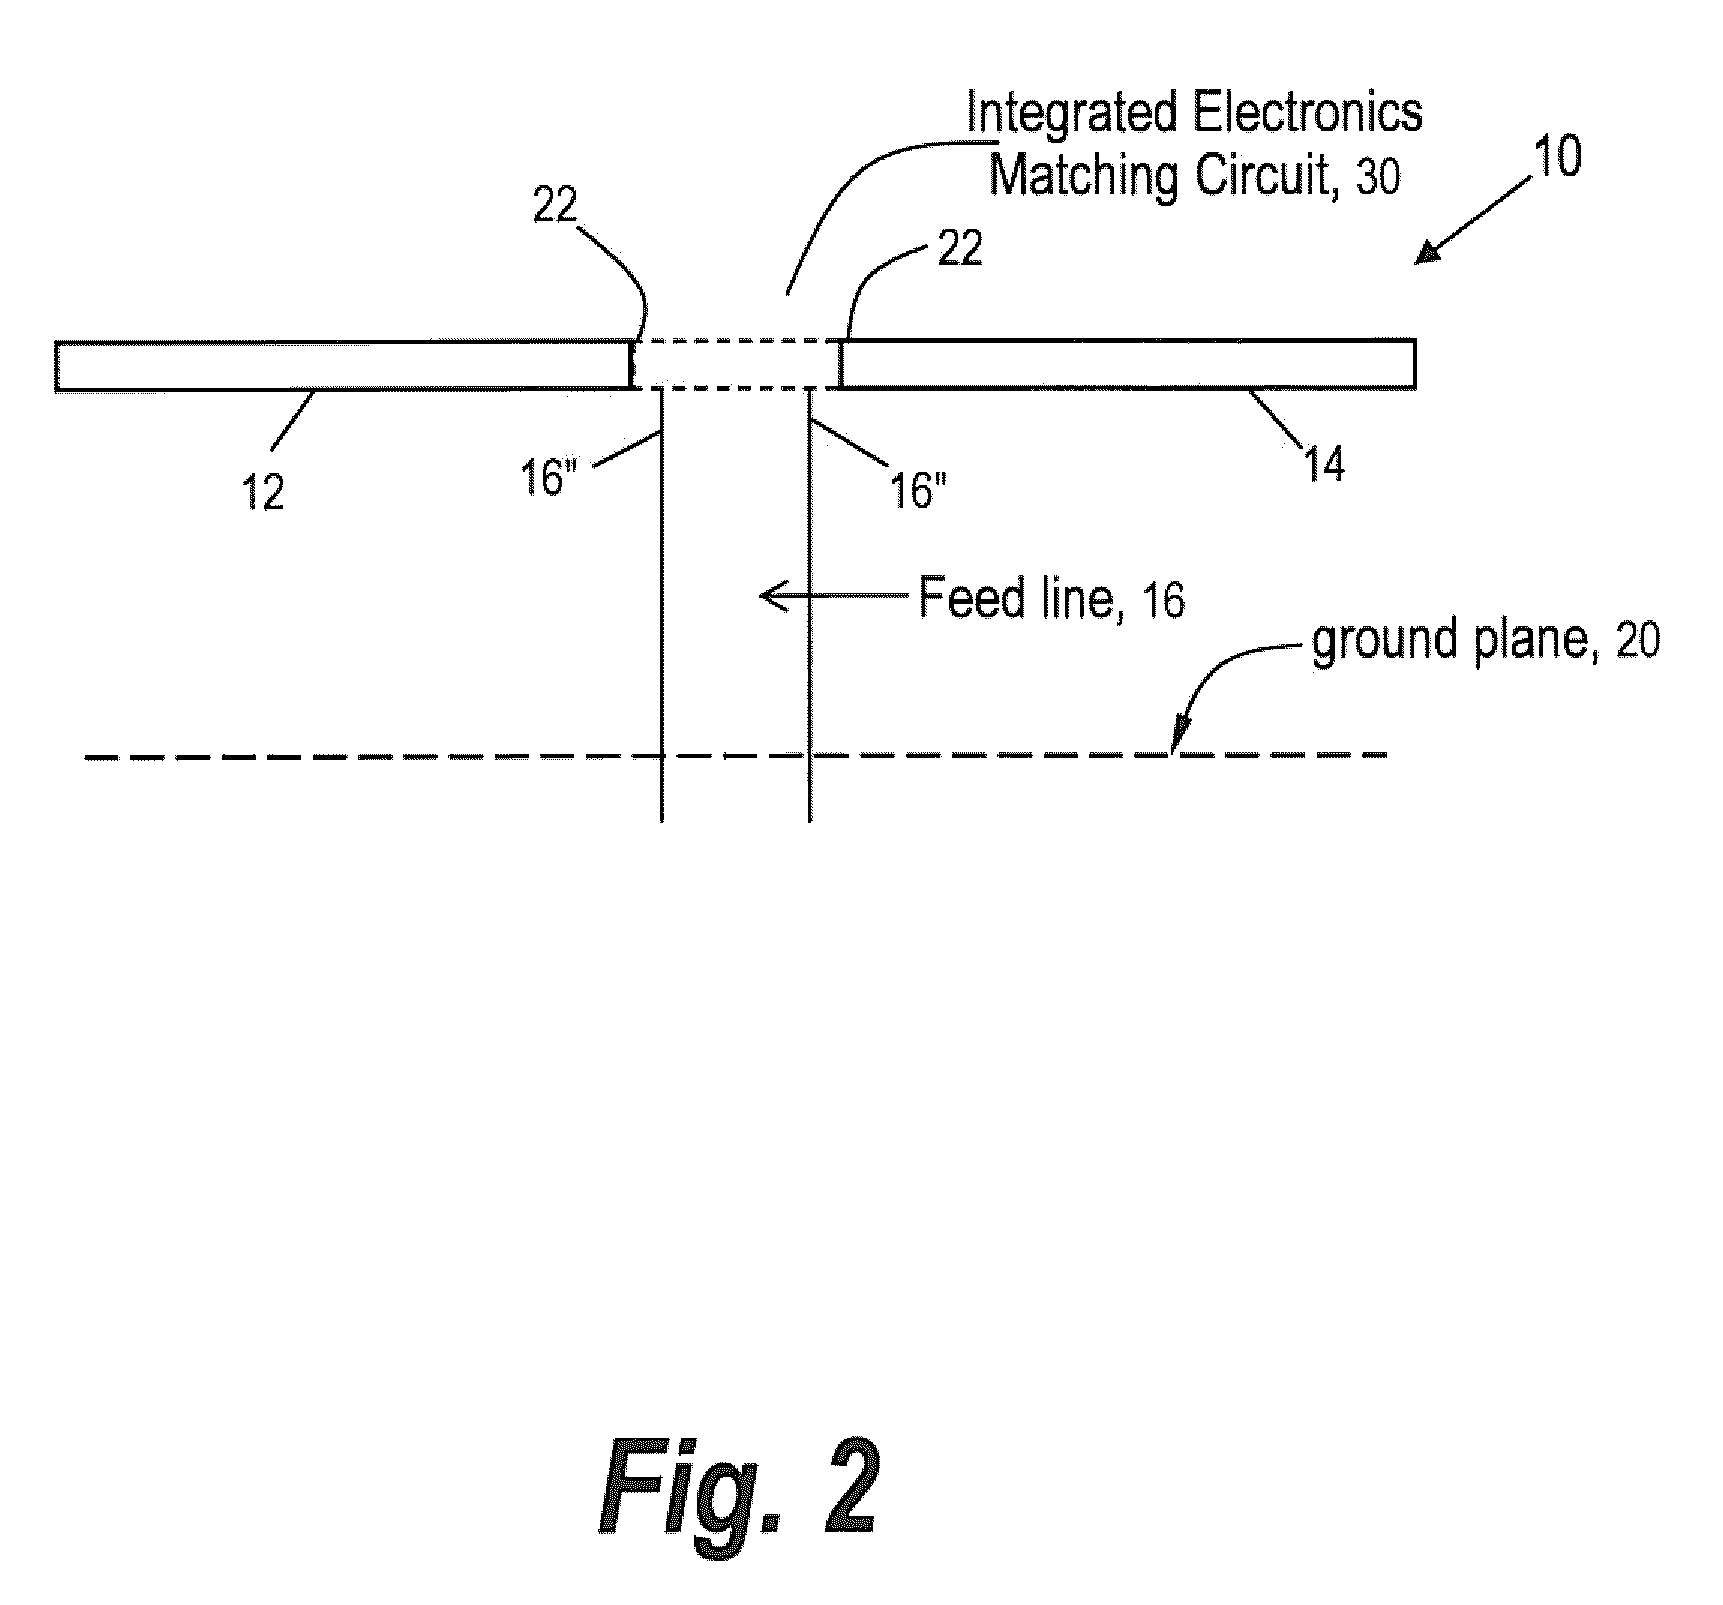 Integrated electronics matching circuit at an antenna feed point for establishing wide bandwidth, low vswr operation, and method of design